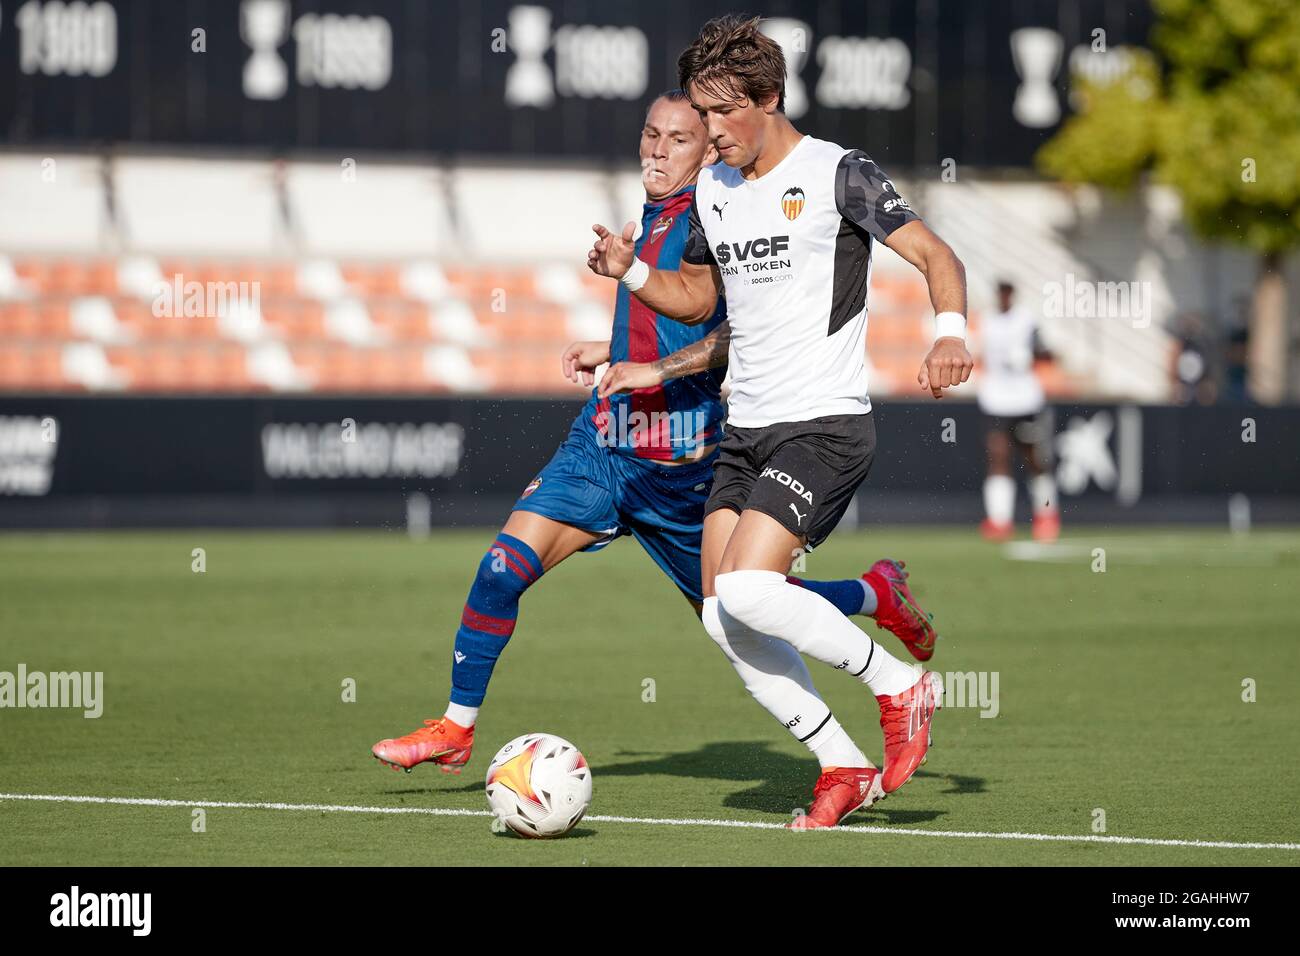 Valencia, Spain. 30th July, 2021. Players in action during the preseason  friendly match between Valencia CF and Levante UD at Estadio Antonio  Puchades in Valencia, Spain. (Credit: Indira) Credit: DAX Images/Alamy Live